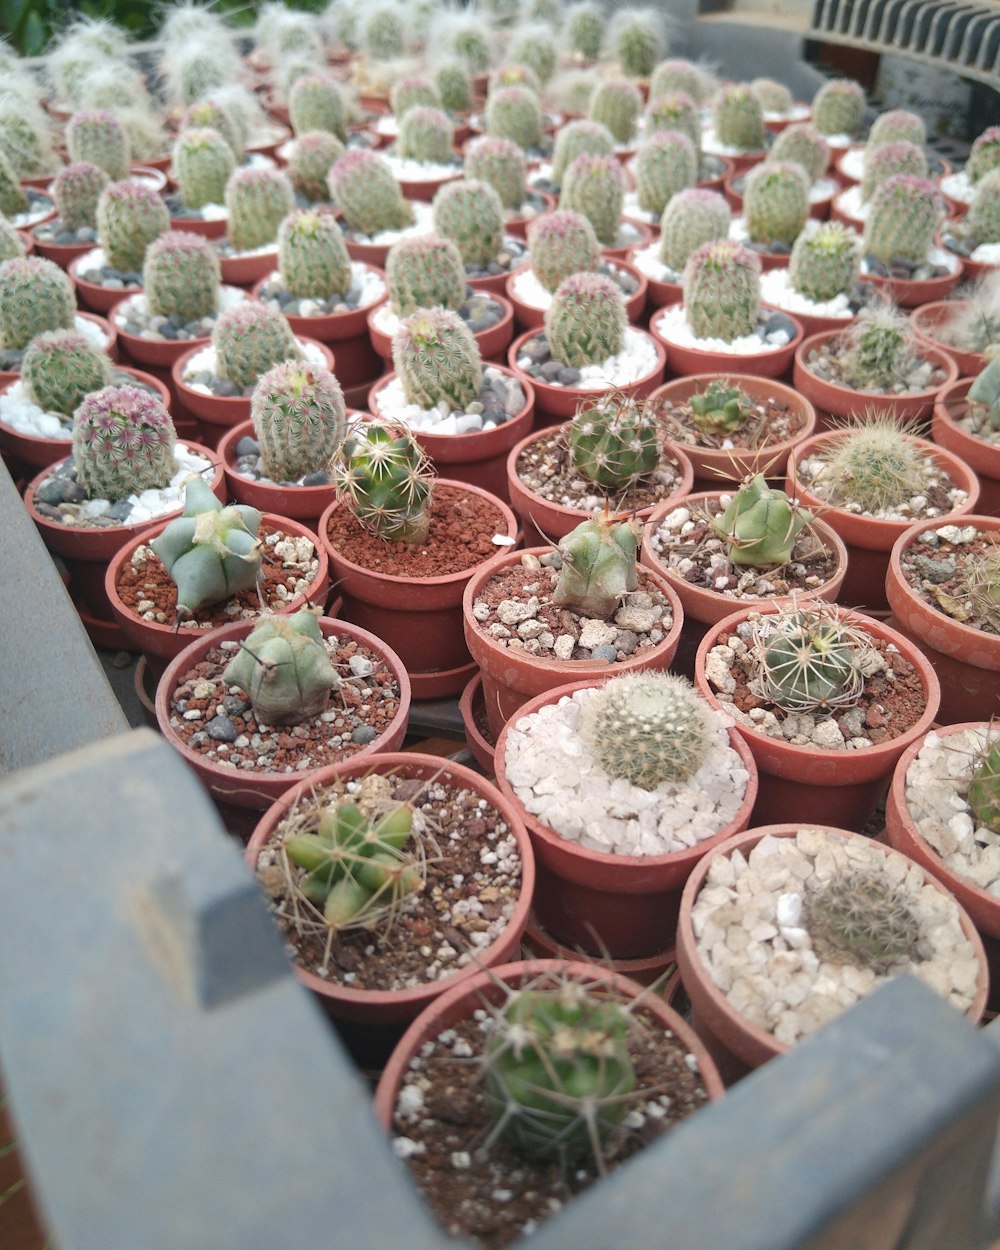 green cactus plants on red plastic pots